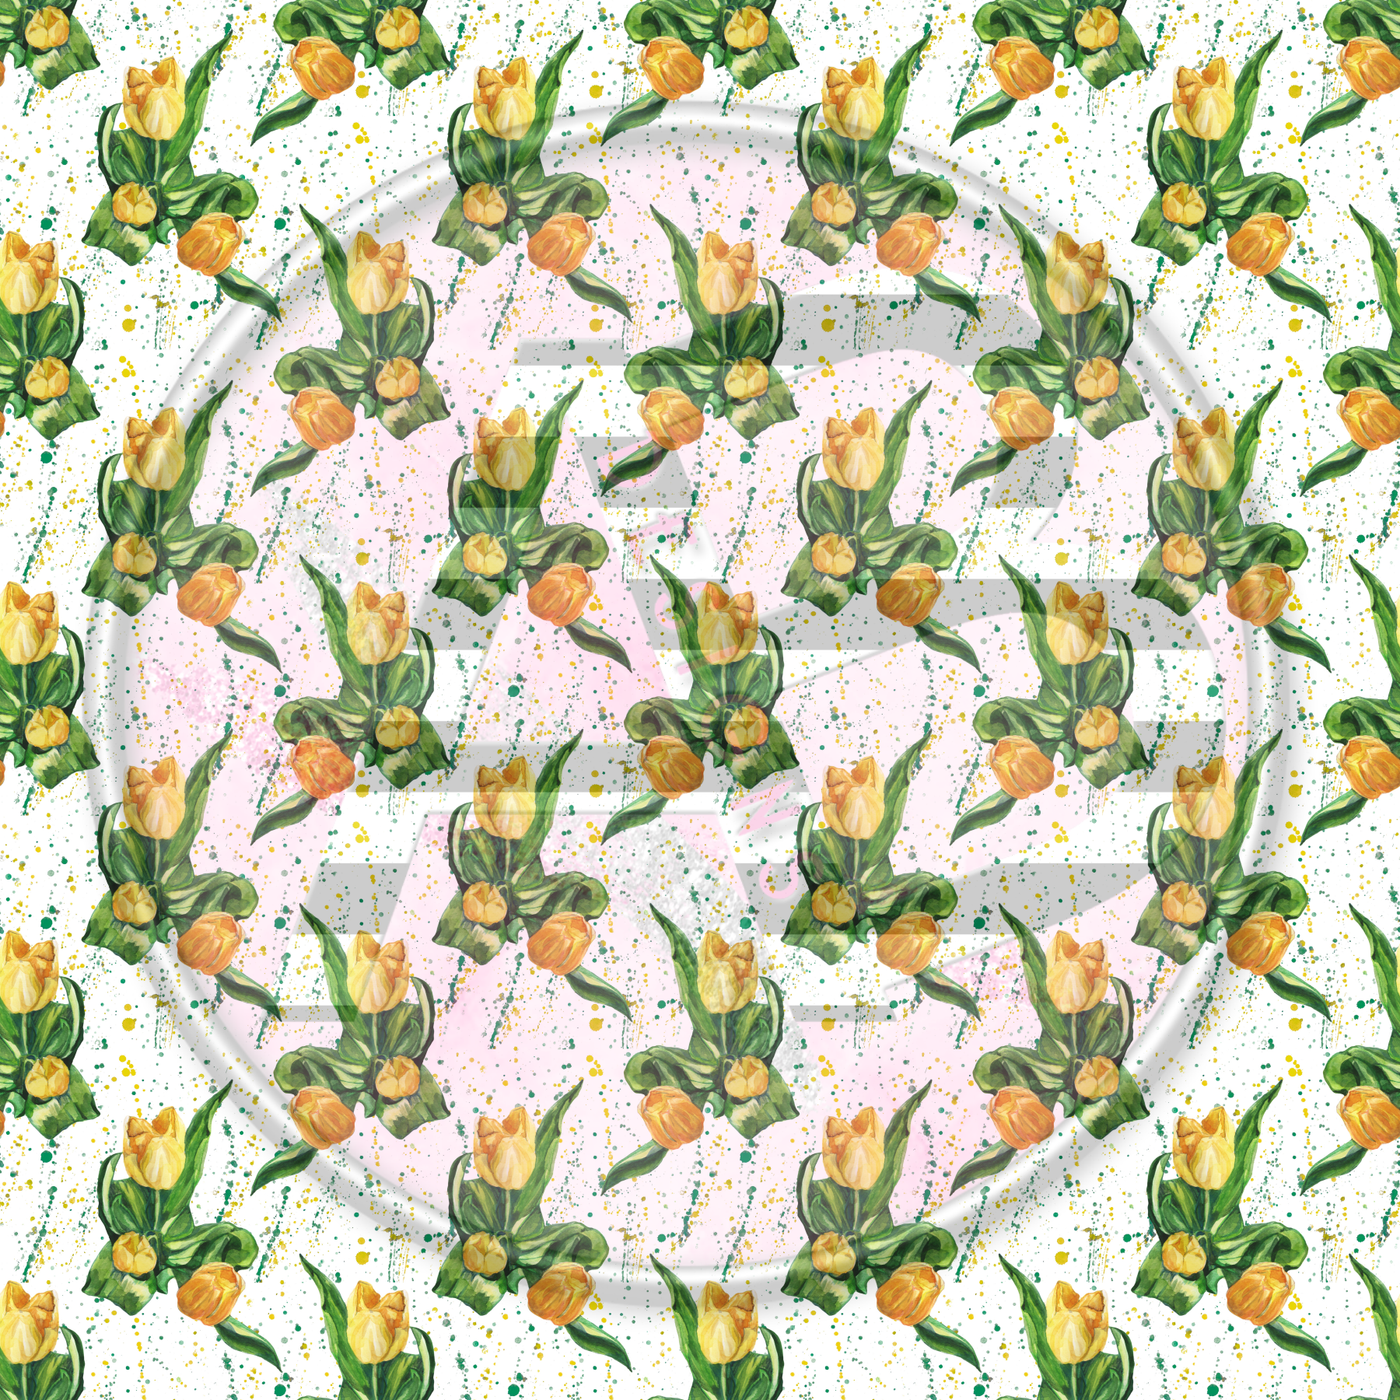 Adhesive Patterned Vinyl - Tulips 01 Smaller